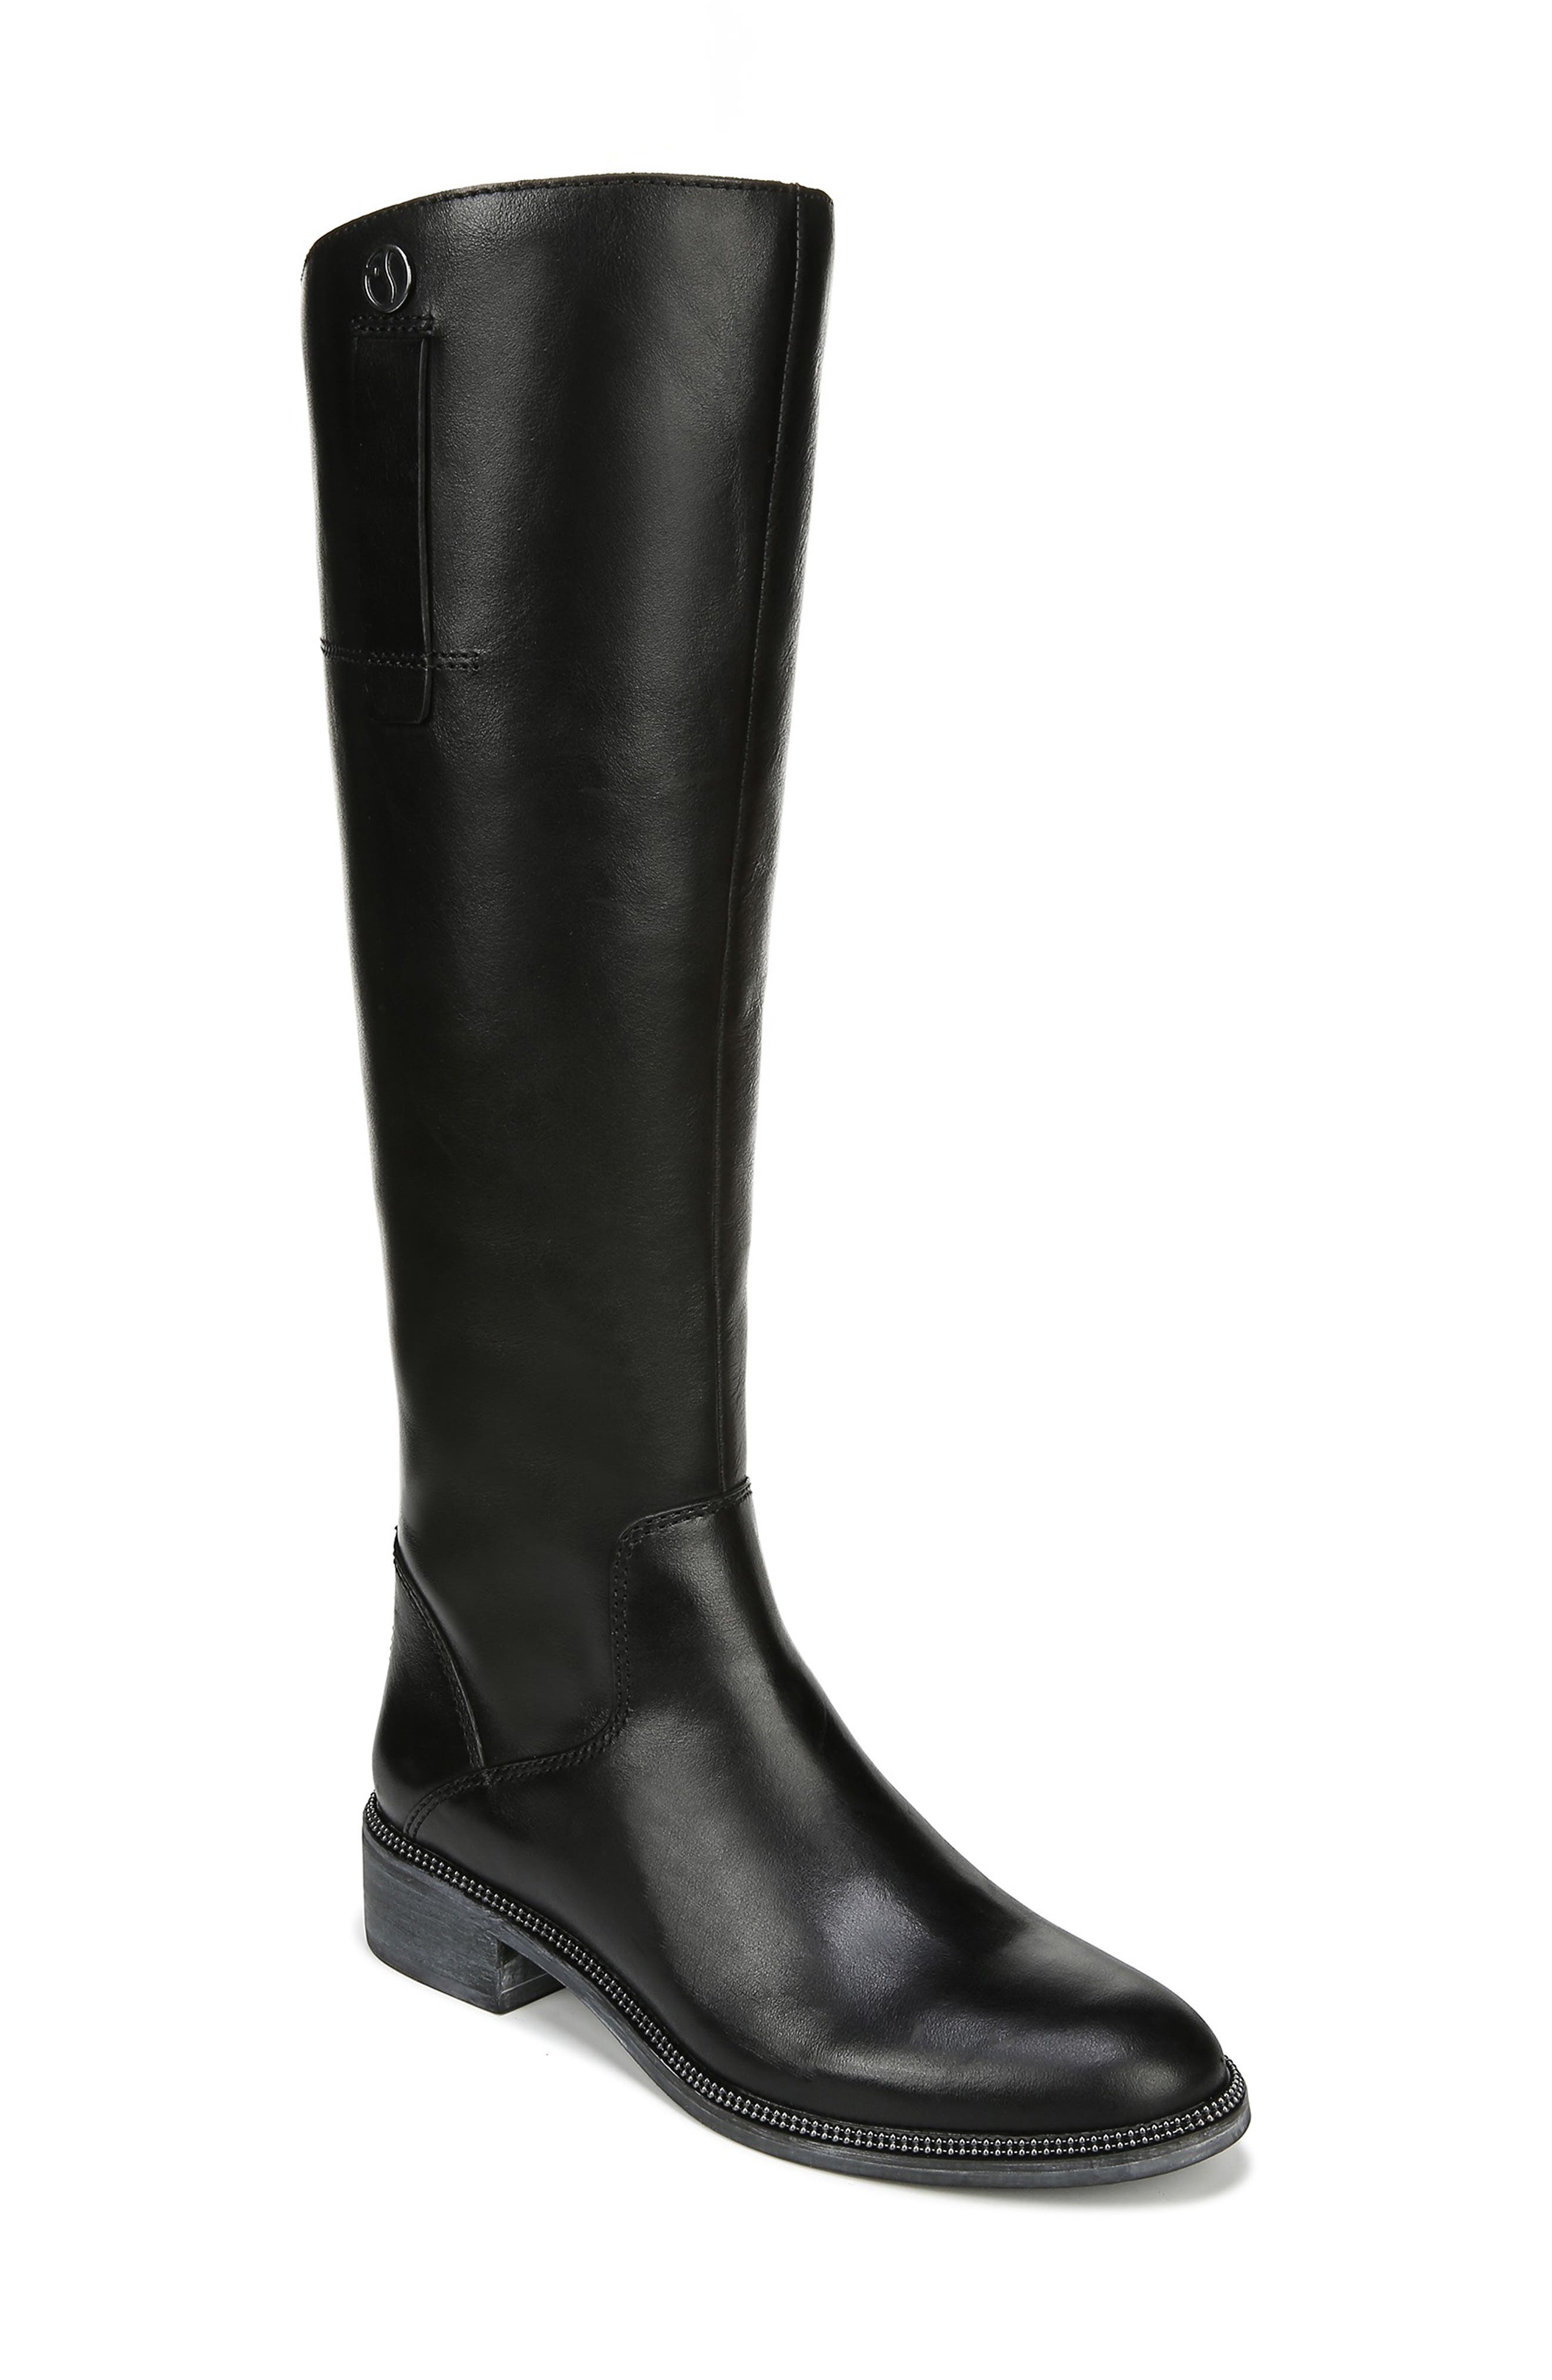 Tall Boots For Women Wide Calf Hotsell, 57% OFF | www 